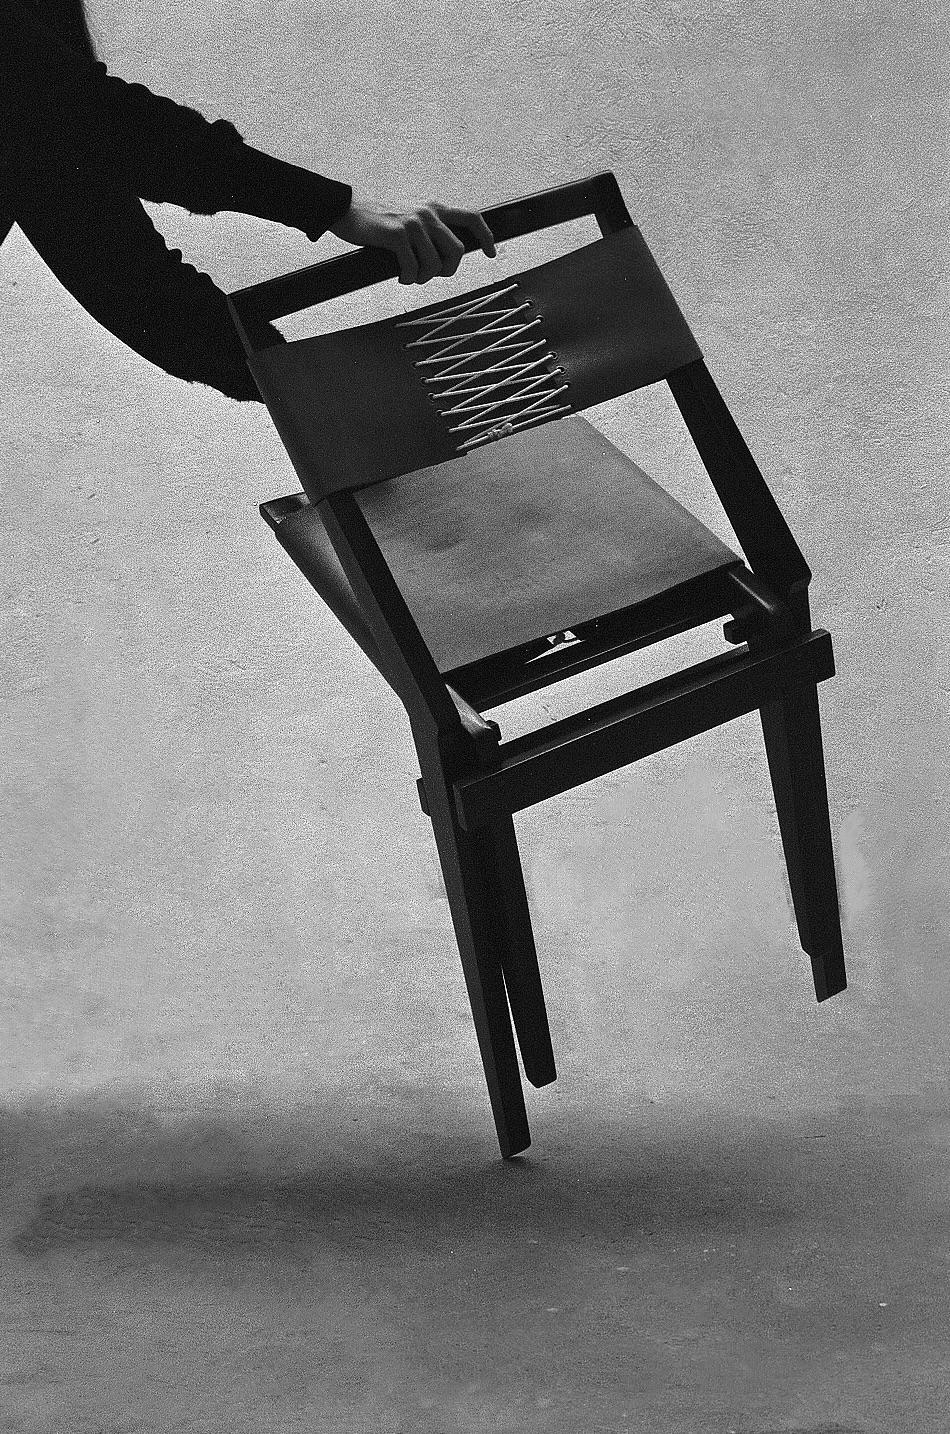 This exceptional chair bears the hallmark of Lina Bo Bardi's ingenuity, crafted specifically for the MASP's auditorium during its tenure on 7th April street. Back in 1947, Lina recognized the absence of a suitable modern chair in São Paulo's